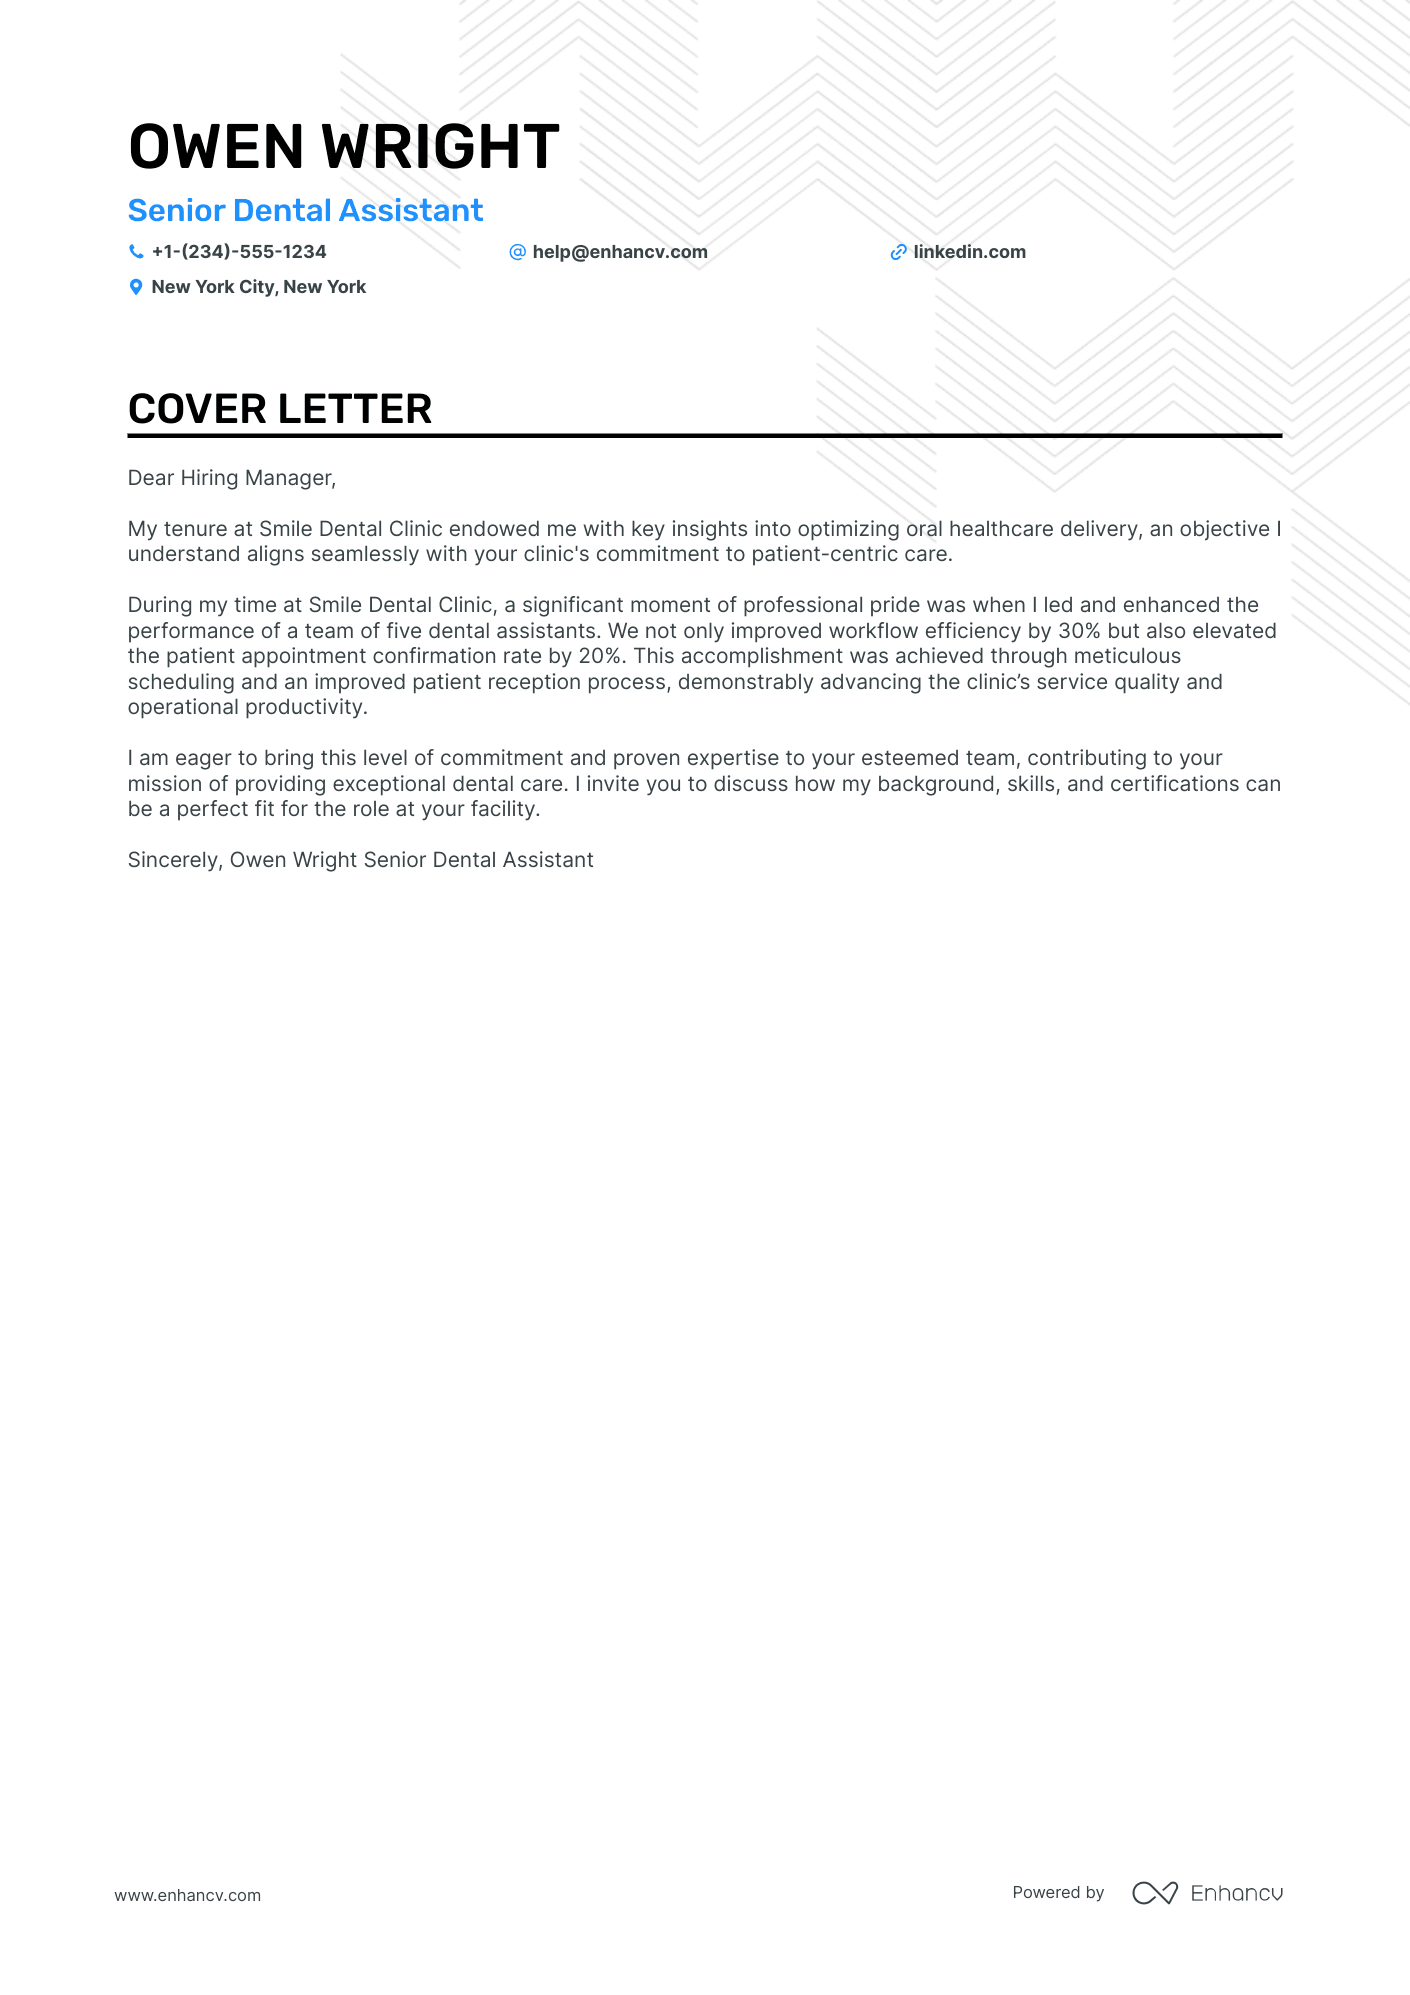 how to write a cover letter for dental assistant